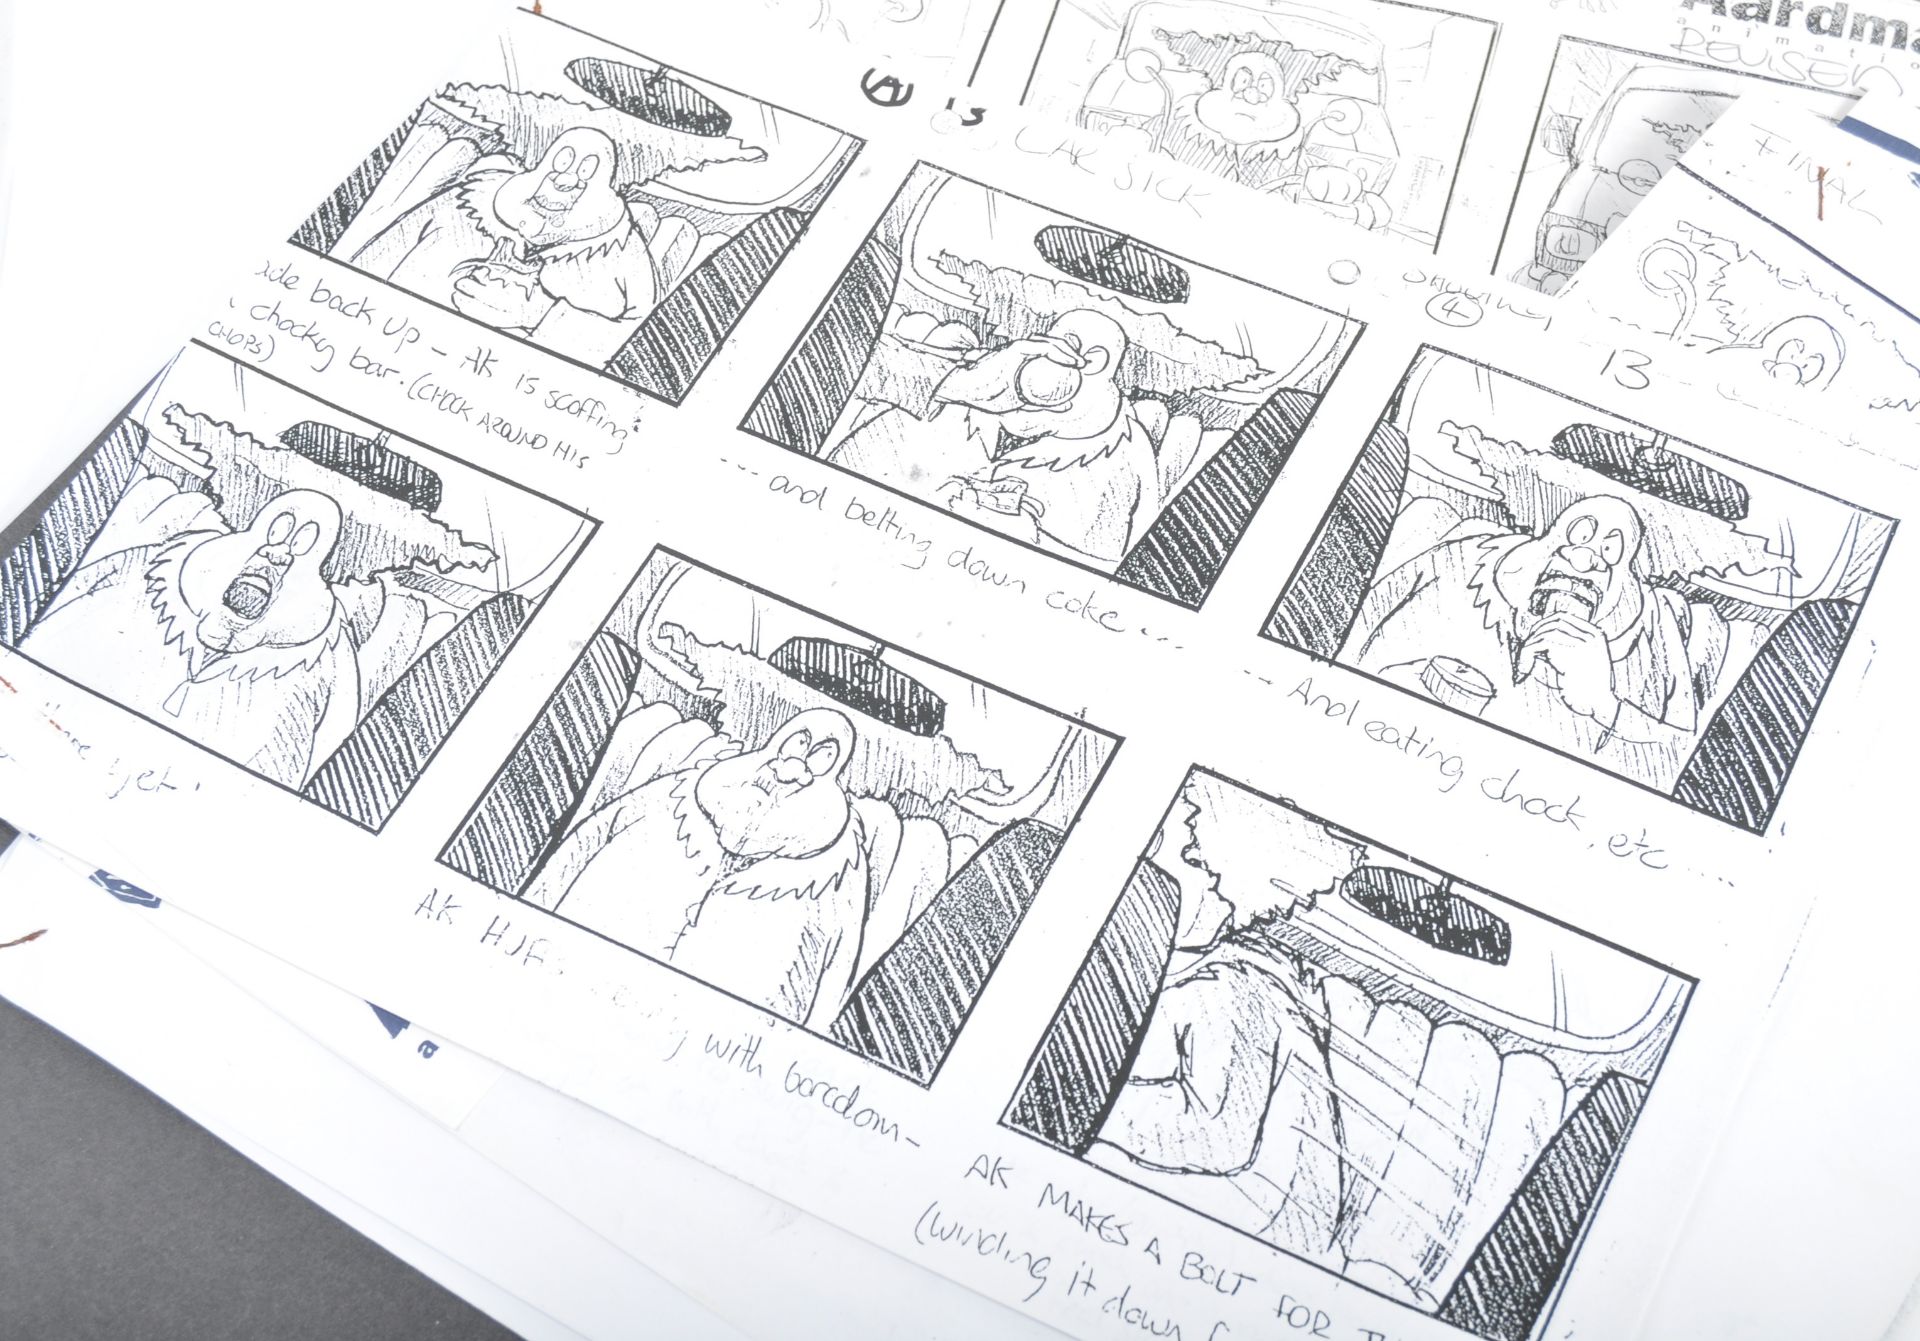 AARDMAN ANIMATIONS - ANGRY KID (1999) - PRODUCTION STORYBOARDS - Bild 3 aus 7